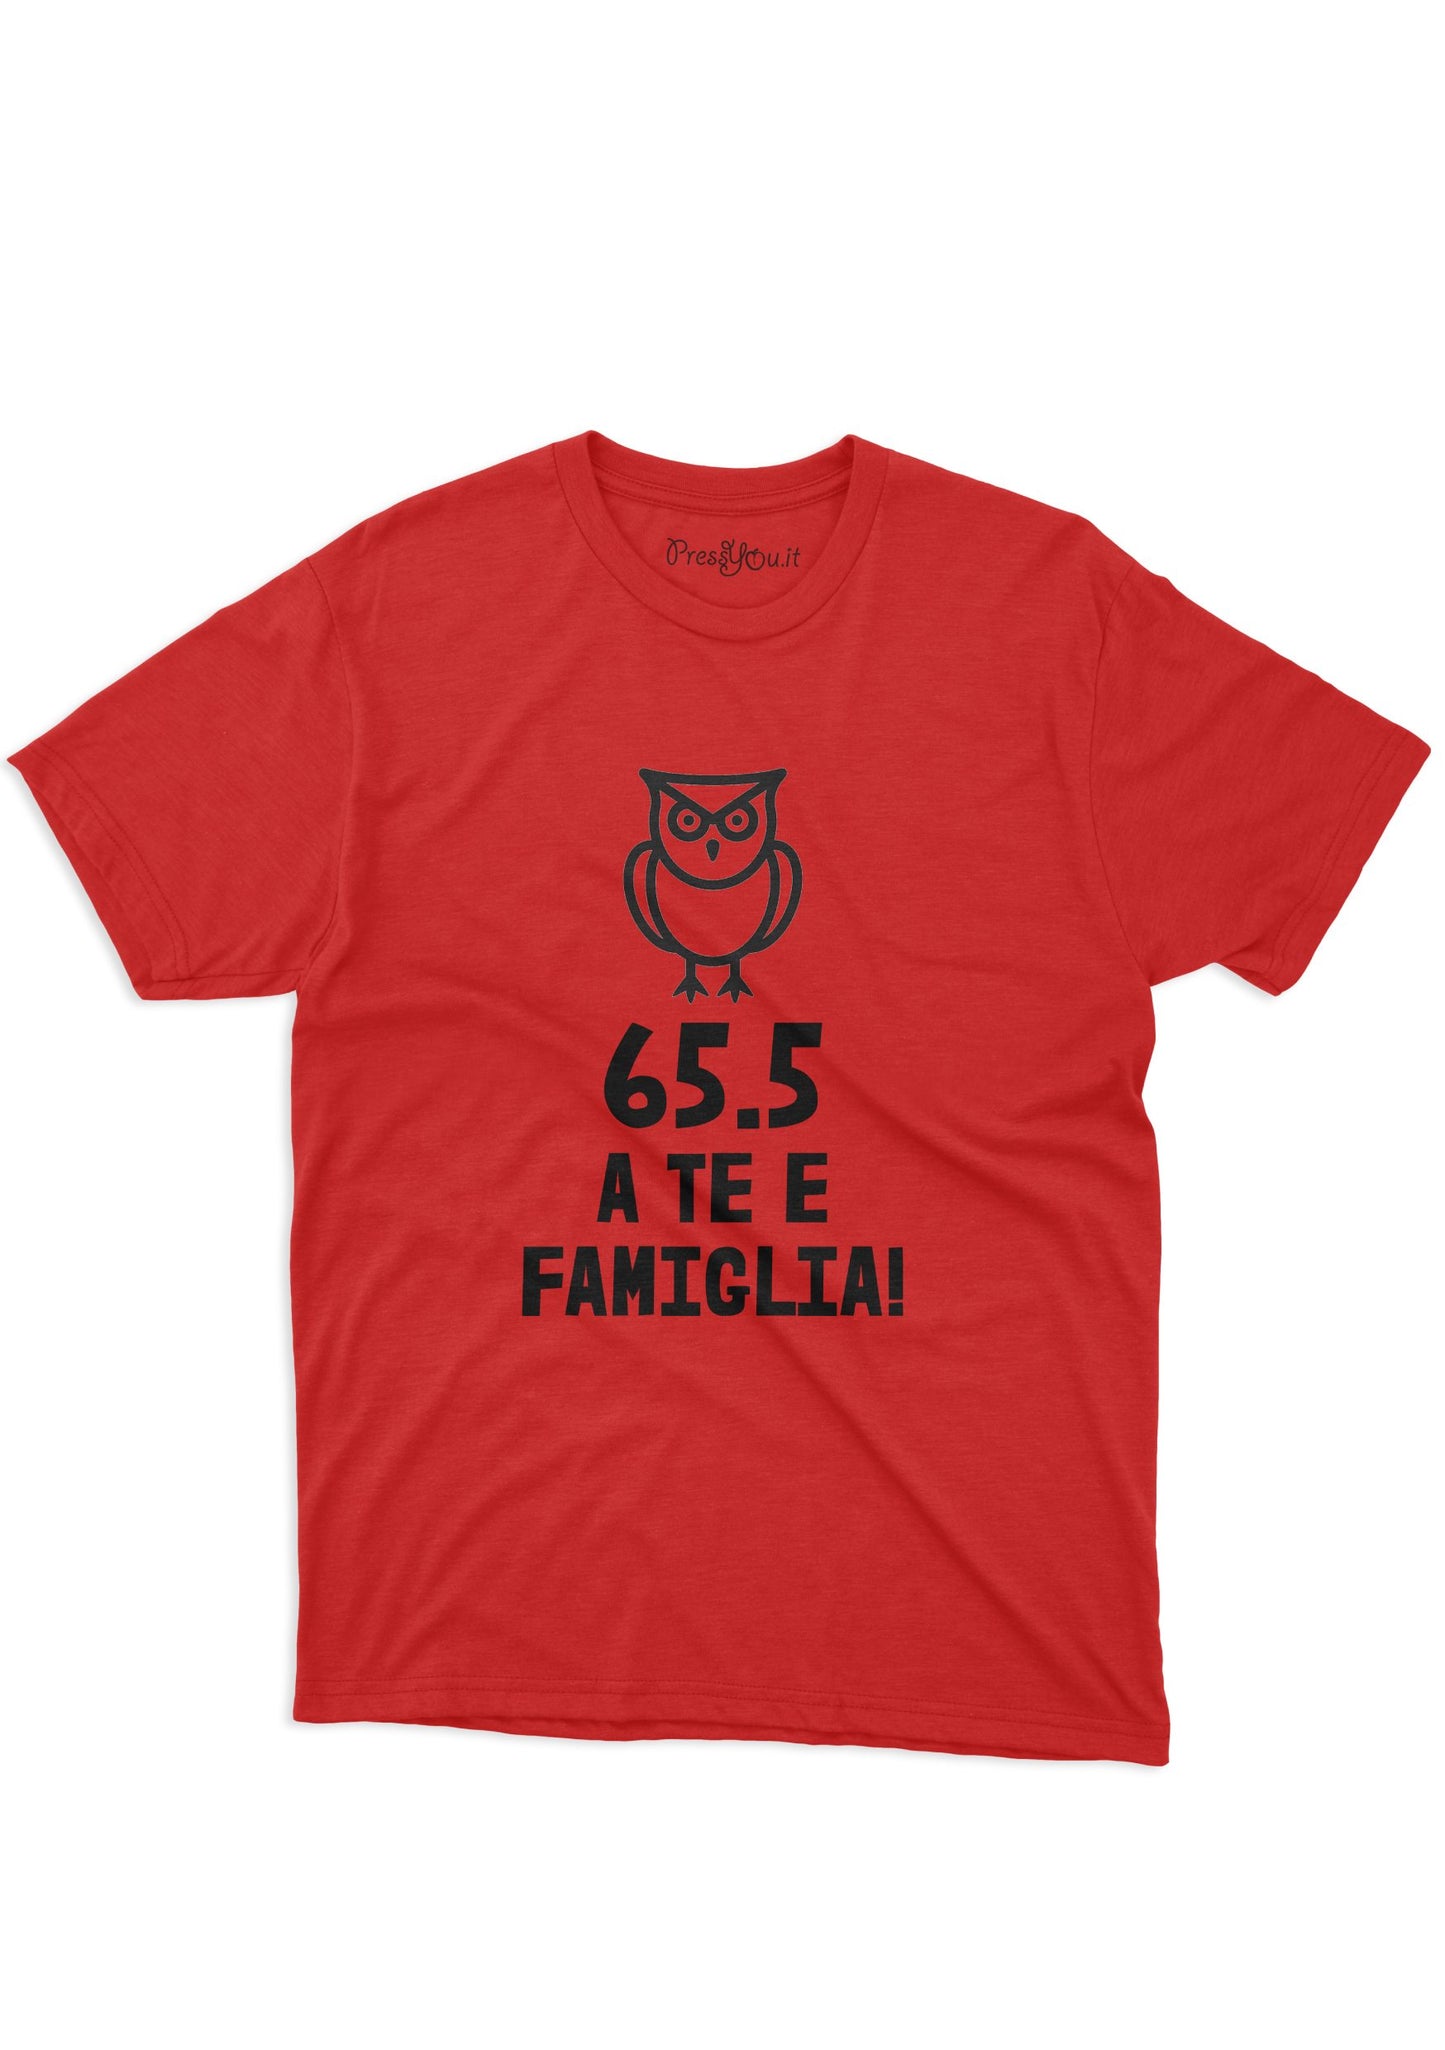 t-shirt - fantasy football 65 5 to you and your family owl superstition fun gift idea